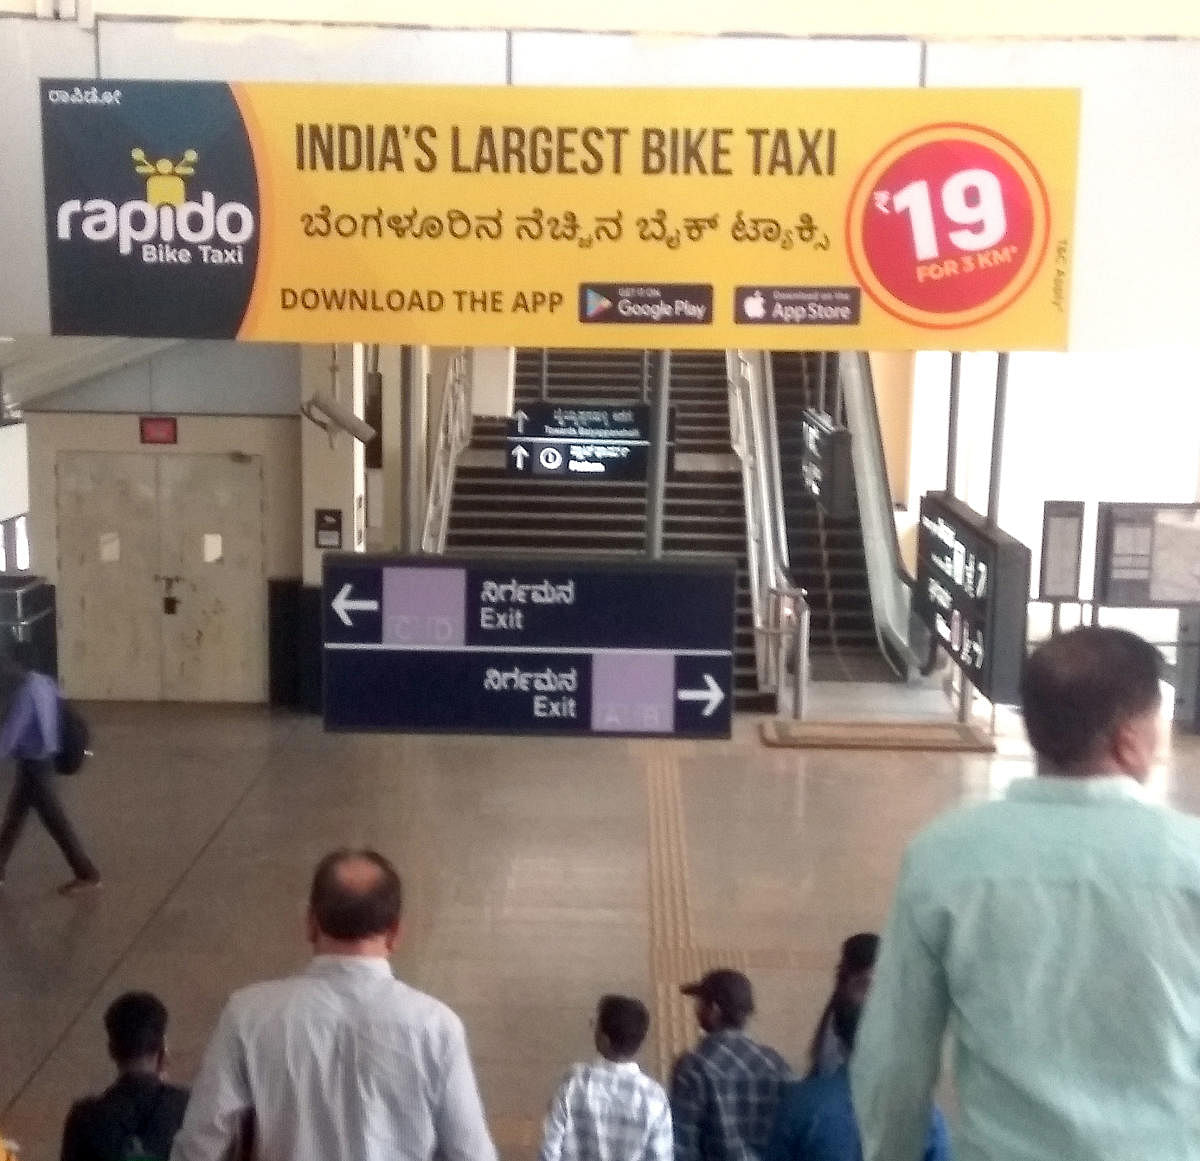 Crackdown on Rapido bike taxis as time runs out